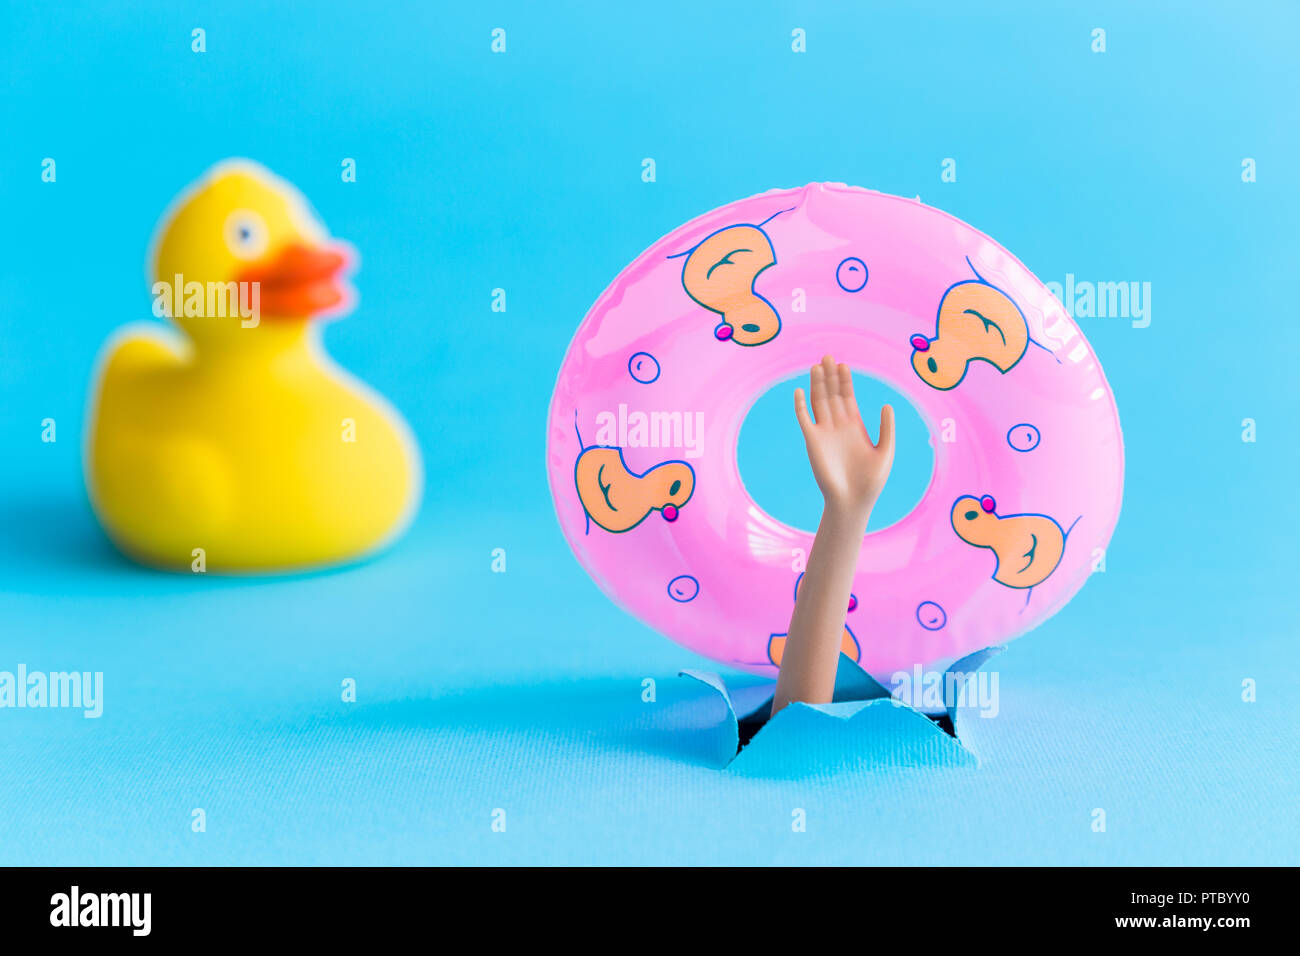 Small rubber duck and doll hand from the water with inflatable pool float minimalistic abstract. Stock Photo